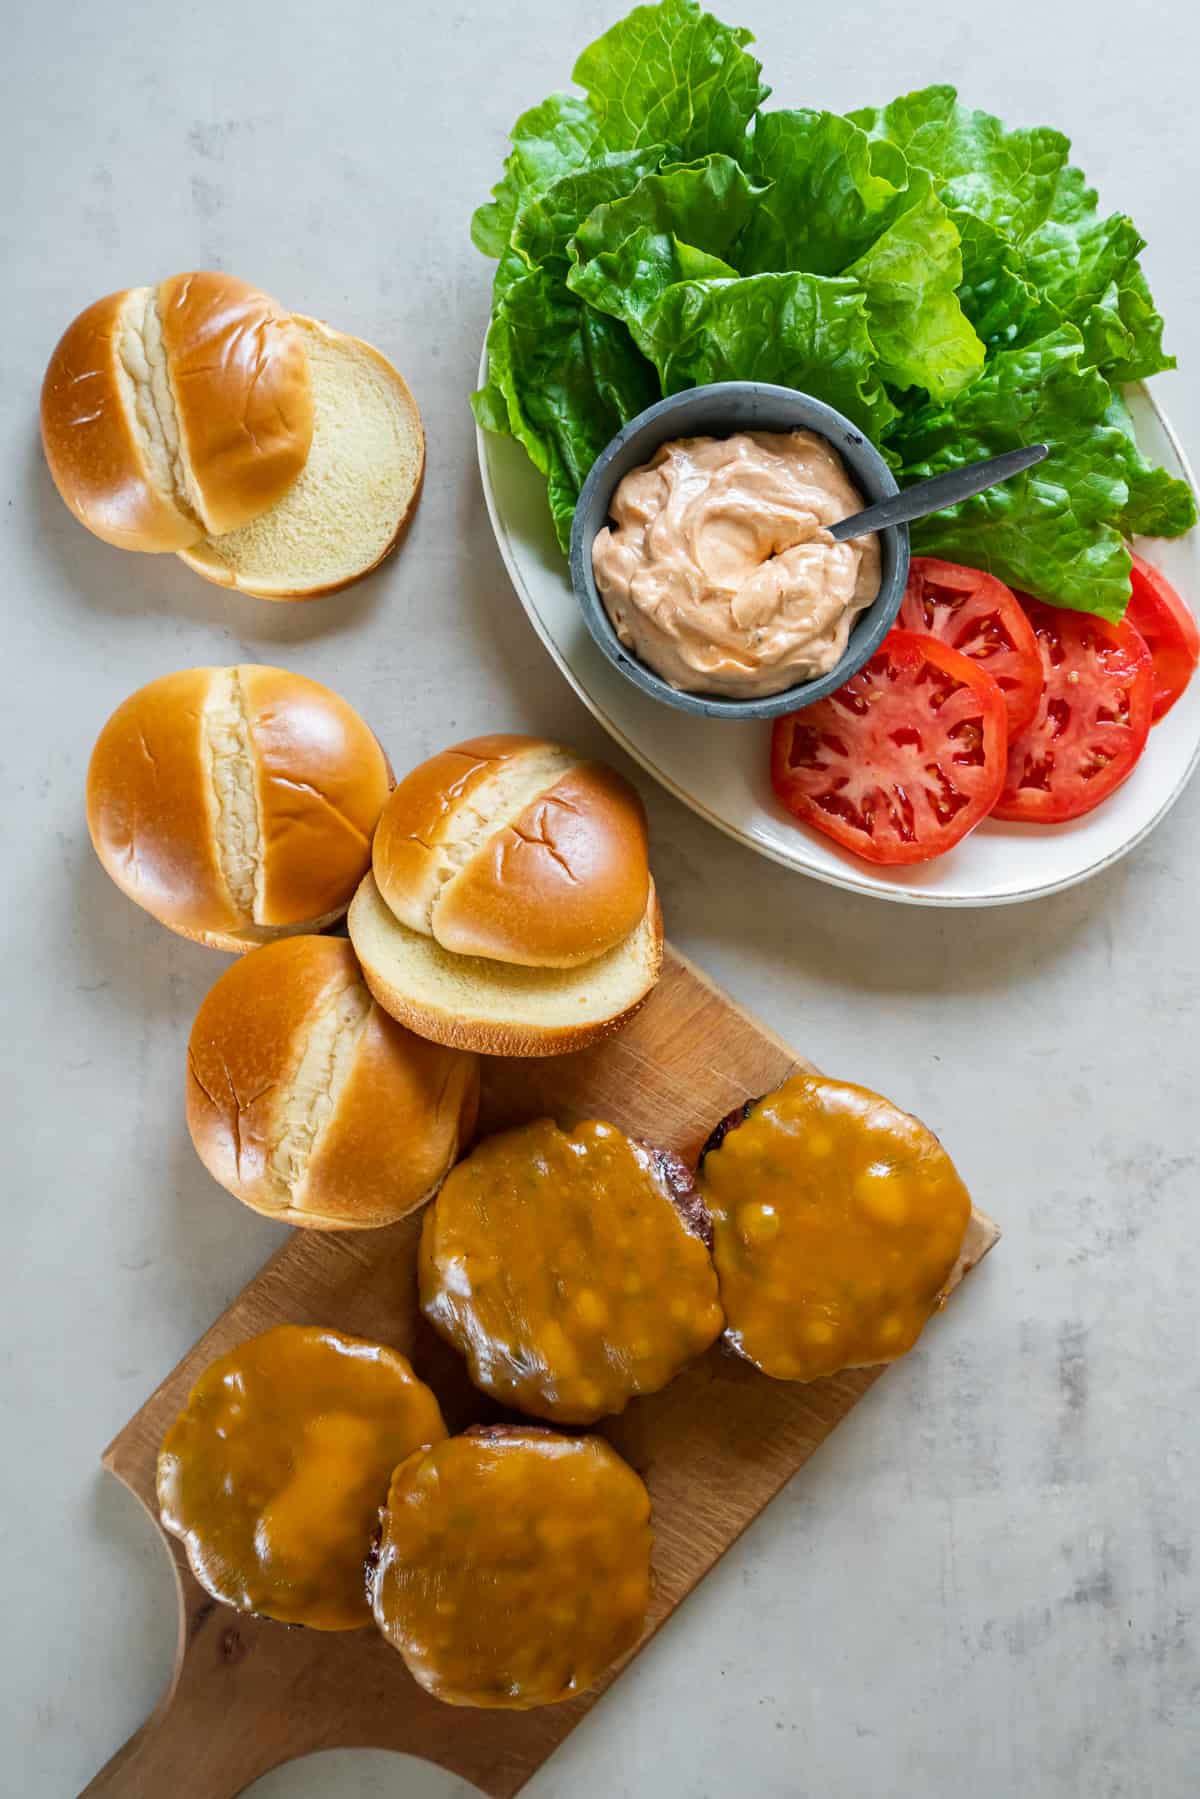 Burger patties with melted cheese, brioche buns, and burger toppings.